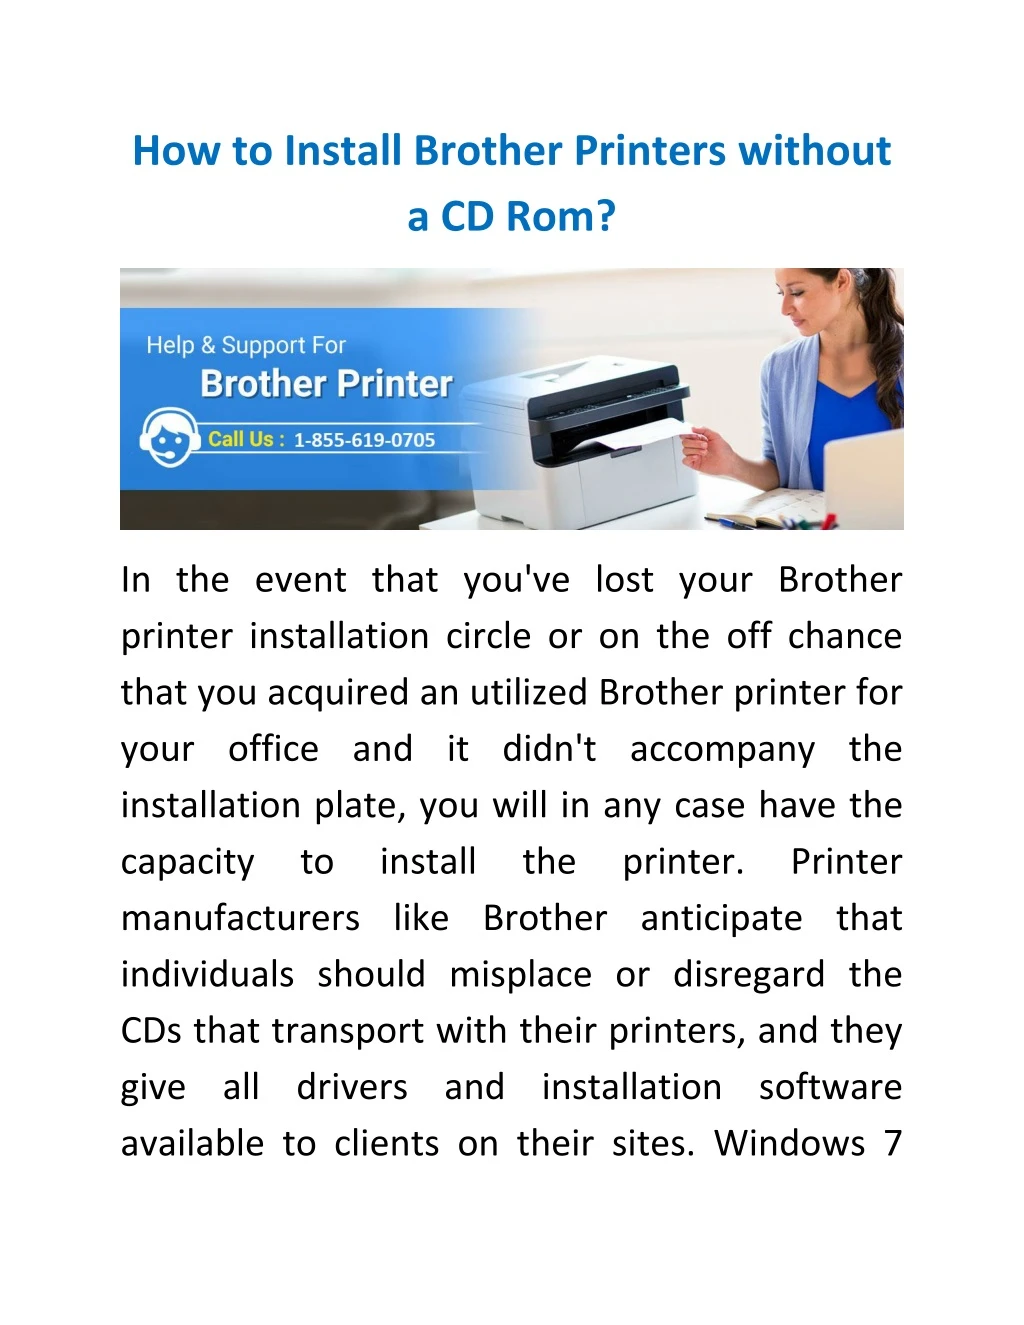 how to install brother printers without a cd rom